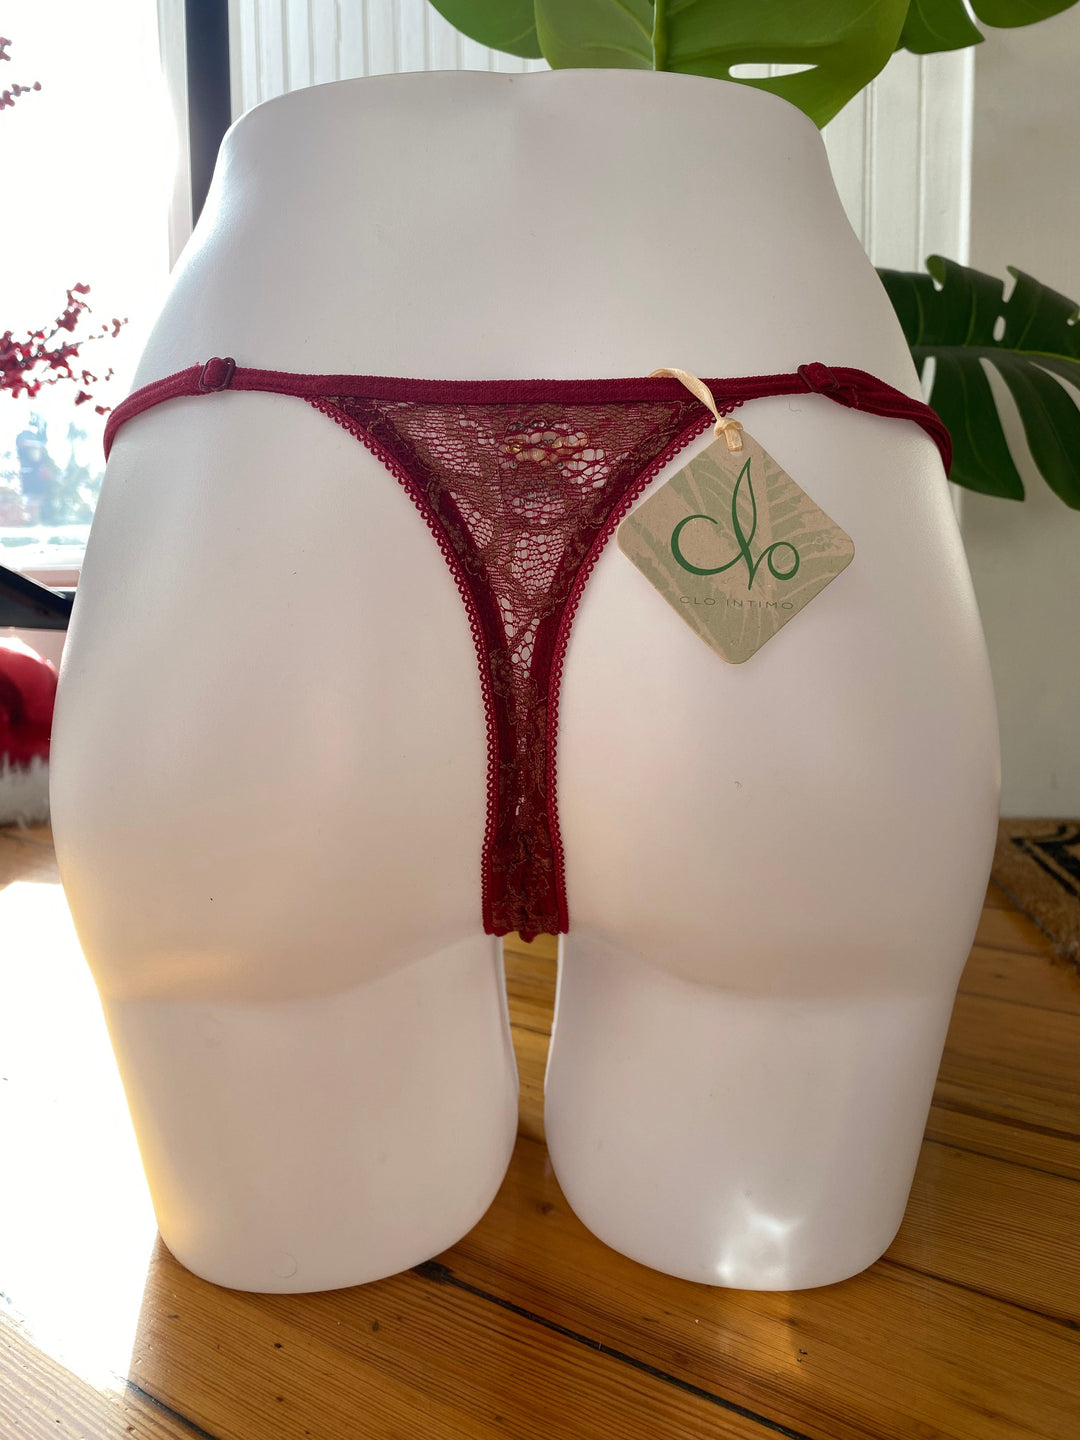 Clo Intimo Underwear Red Clay / OS CLO intimo Fortuna Adjustable String Thong